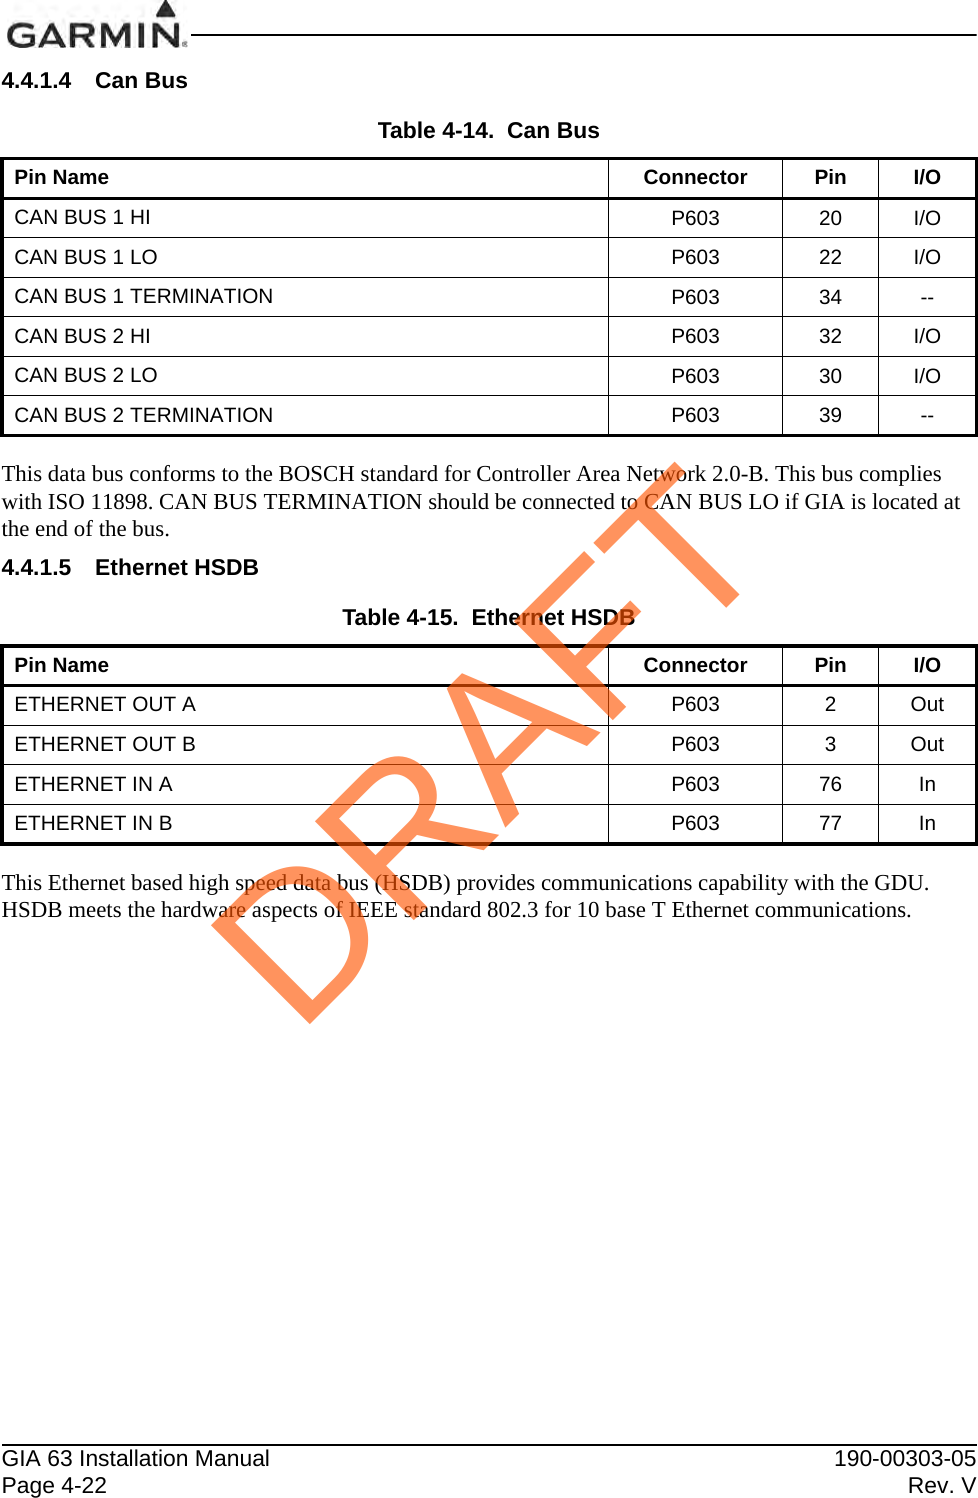 GIA 63 Installation Manual 190-00303-05Page 4-22 Rev. V4.4.1.4 Can BusThis data bus conforms to the BOSCH standard for Controller Area Network 2.0-B. This bus complies with ISO 11898. CAN BUS TERMINATION should be connected to CAN BUS LO if GIA is located at the end of the bus.4.4.1.5 Ethernet HSDBThis Ethernet based high speed data bus (HSDB) provides communications capability with the GDU. HSDB meets the hardware aspects of IEEE standard 802.3 for 10 base T Ethernet communications.Table 4-14.  Can BusPin Name Connector Pin I/OCAN BUS 1 HI P603 20 I/OCAN BUS 1 LO P603 22 I/OCAN BUS 1 TERMINATION P603 34 --CAN BUS 2 HI P603 32 I/OCAN BUS 2 LO P603 30 I/OCAN BUS 2 TERMINATION P603 39 --Table 4-15.  Ethernet HSDBPin Name Connector Pin I/OETHERNET OUT A P603 2OutETHERNET OUT B P603 3OutETHERNET IN A P603 76 InETHERNET IN B P603 77 InDRAFT